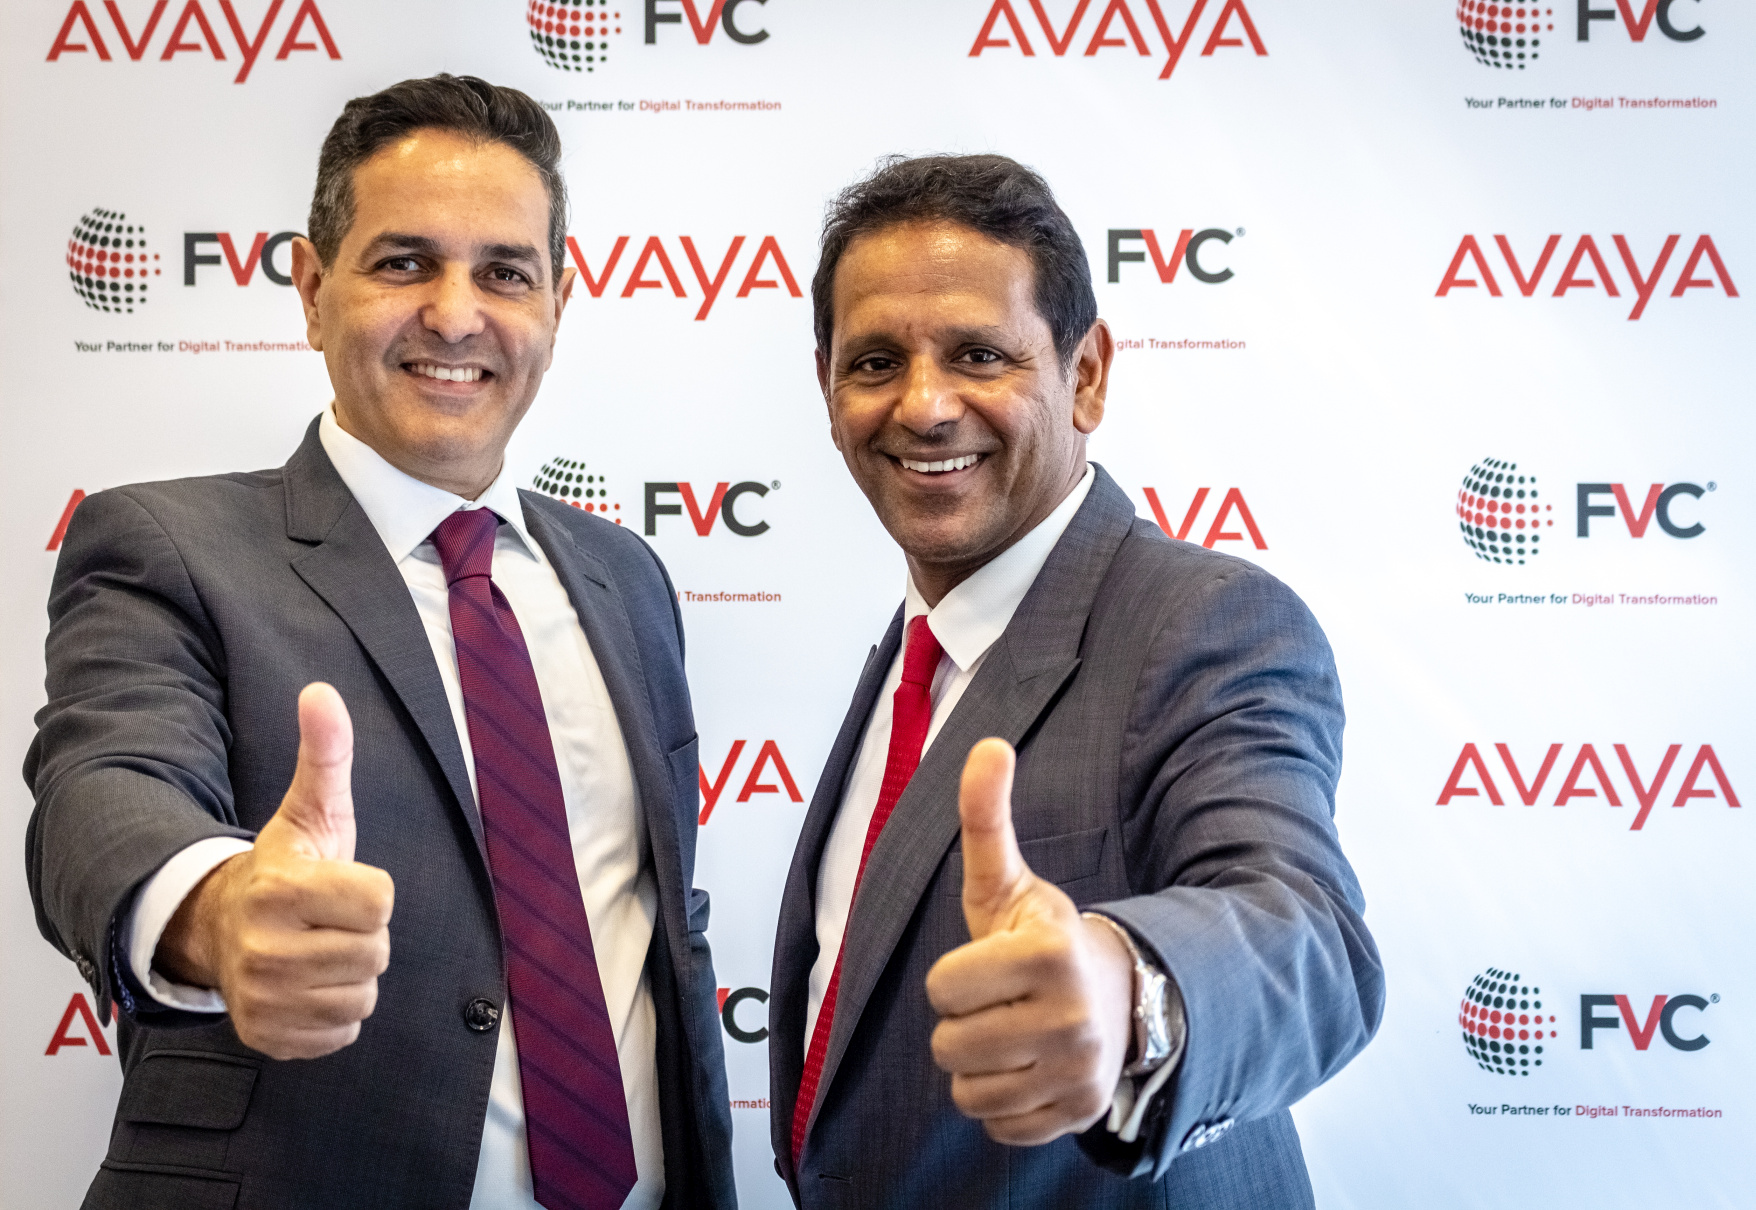 FVC partners with Avaya to help African businesses deliver next-gen digital experiences